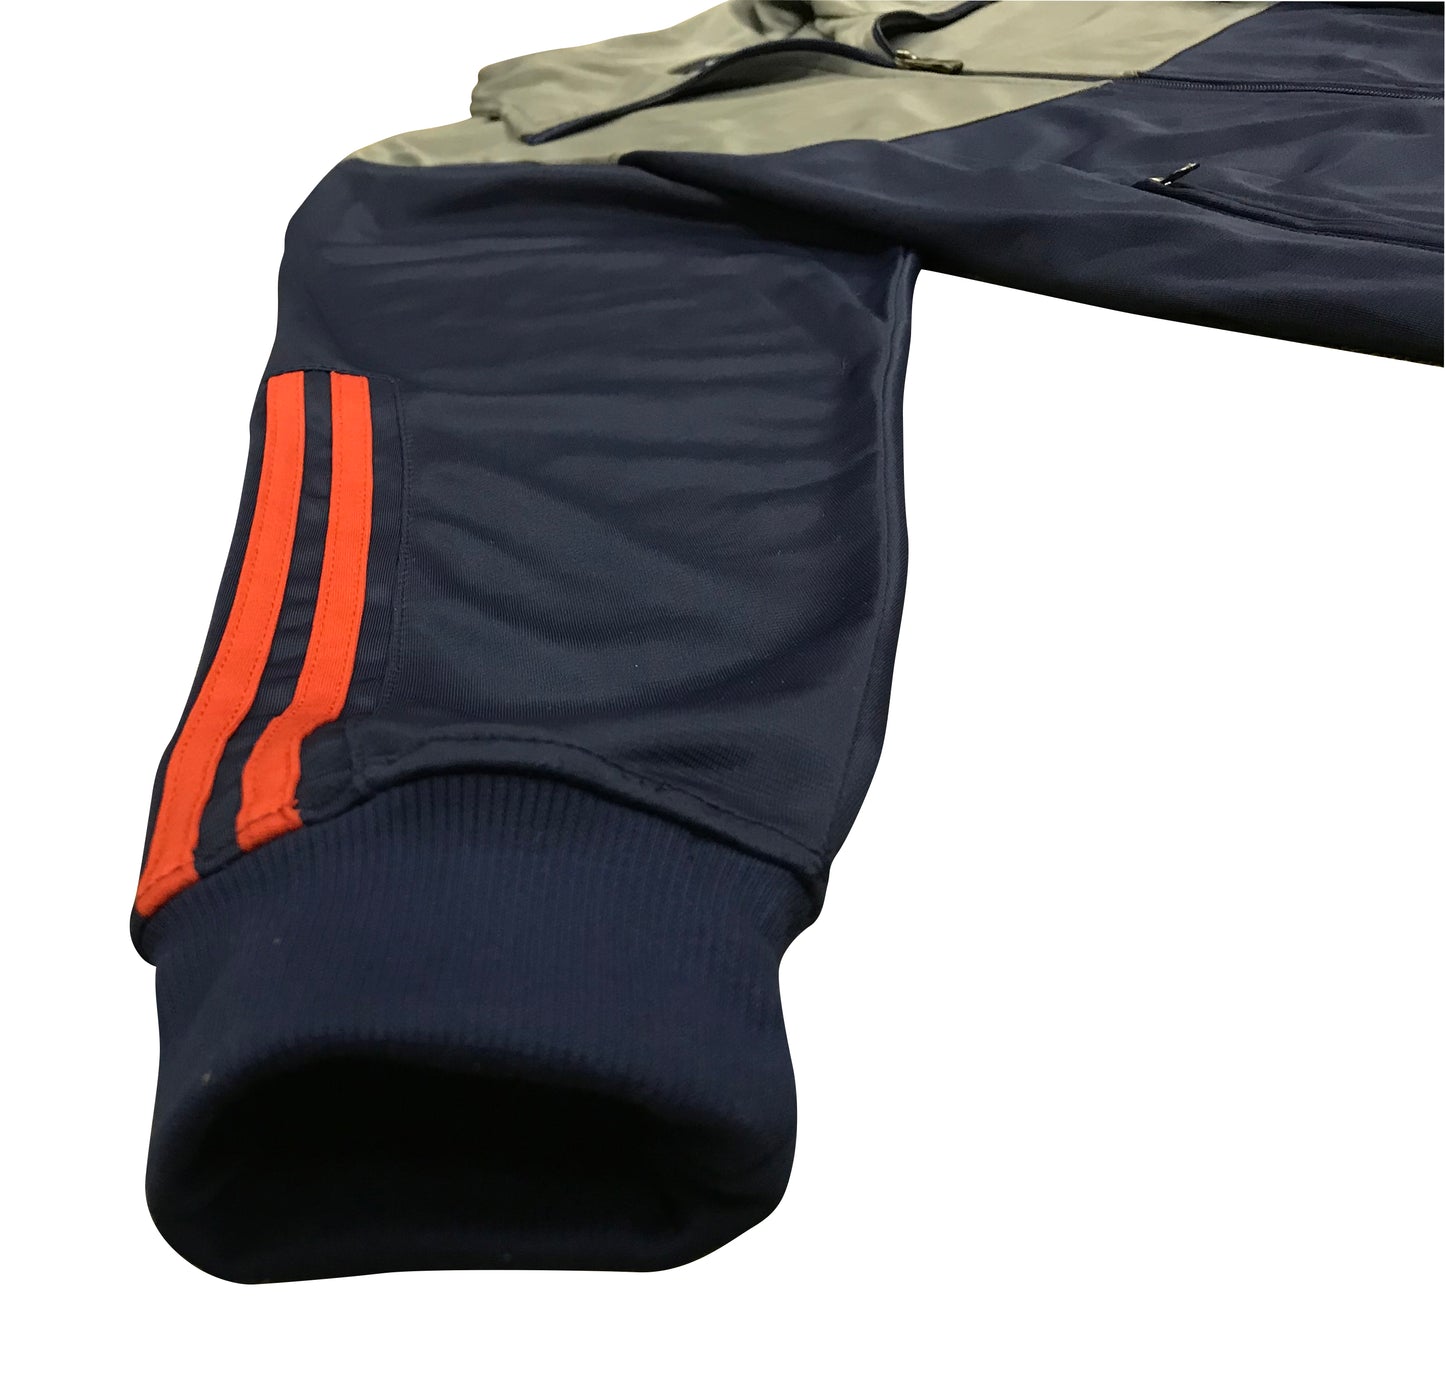 Men’s Velocity Track Jacket Track Pants Jogger Activewear Tracksuit Outfit